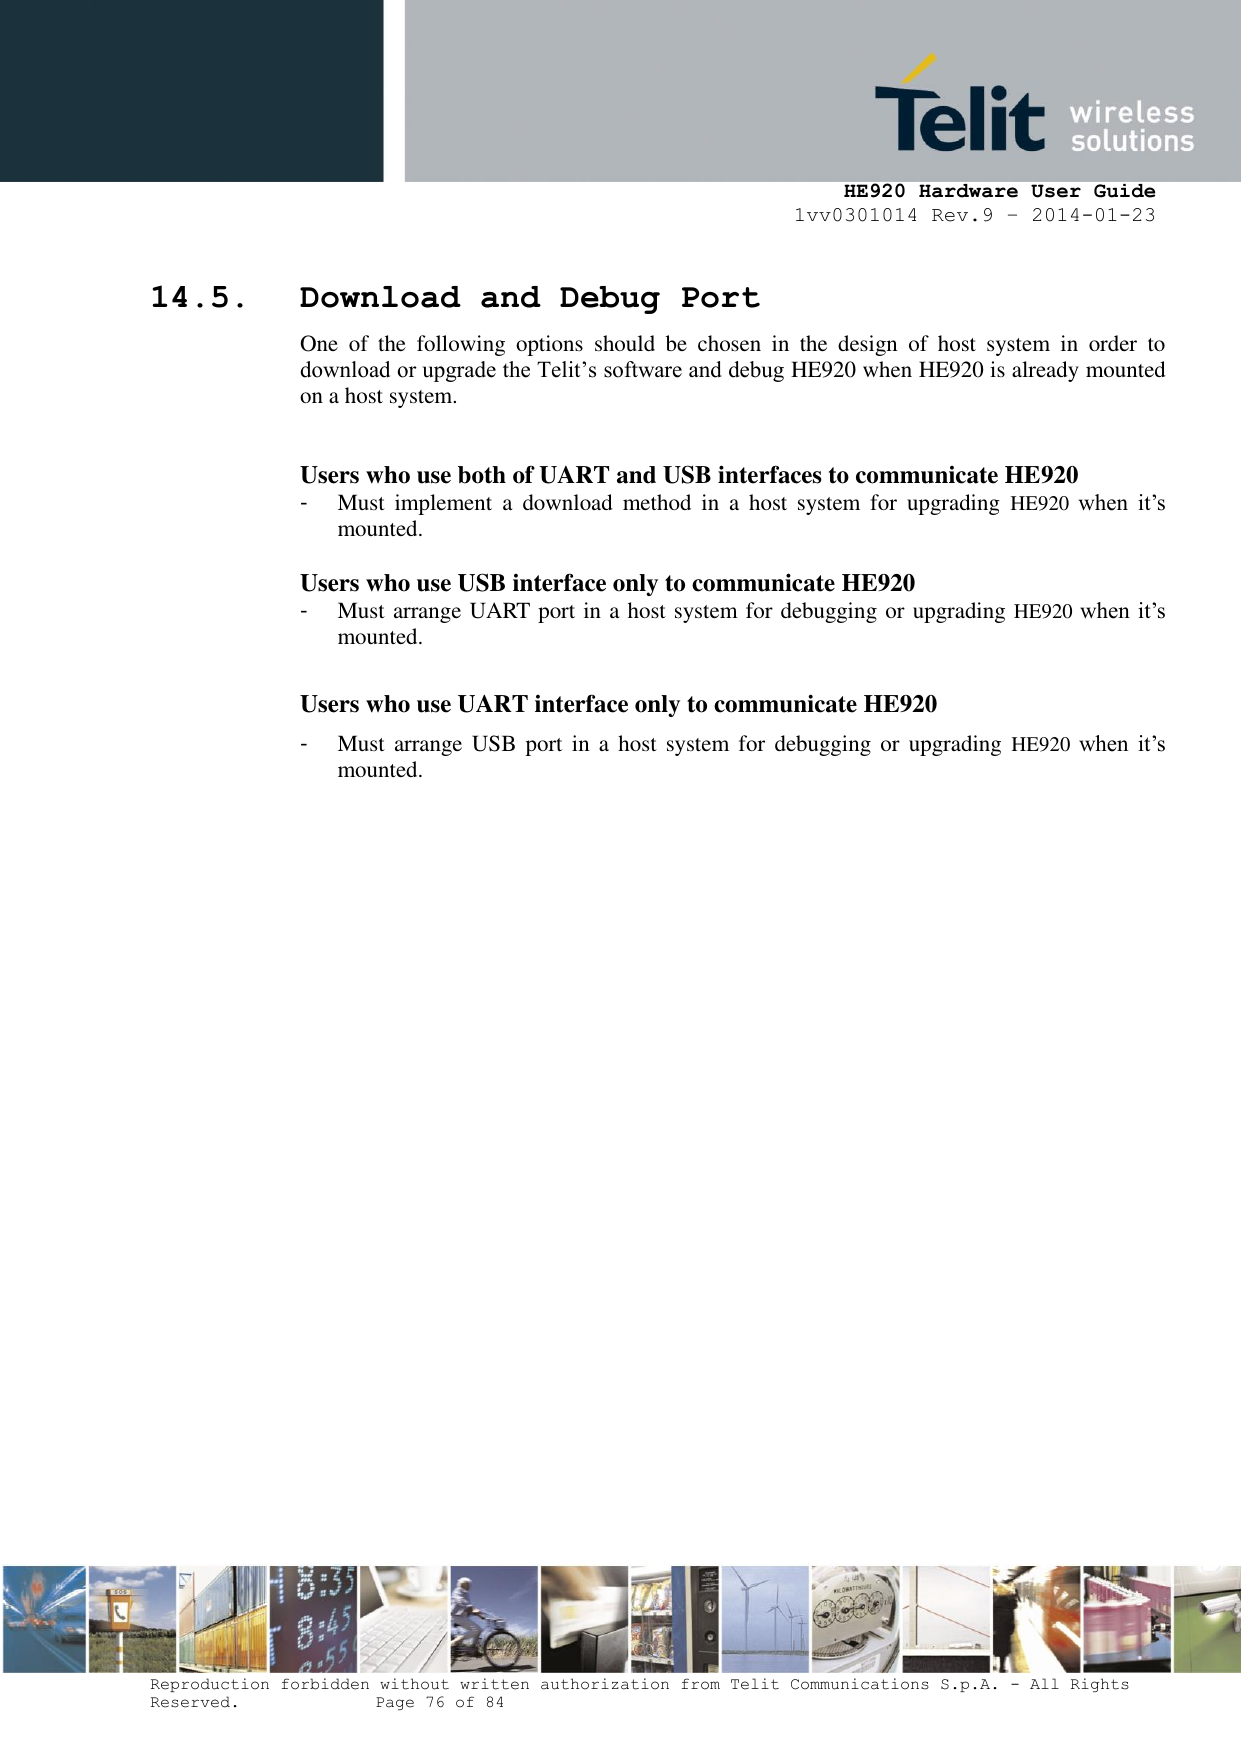     HE920 Hardware User Guide 1vv0301014 Rev.9 – 2014-01-23 Reproduction forbidden without written authorization from Telit Communications S.p.A. - All Rights Reserved.    Page 76 of 84  14.5. Download and Debug Port One  of  the  following  options  should  be  chosen  in  the  design  of  host  system  in  order  to download or upgrade the Telit’s software and debug HE920 when HE920 is already mounted on a host system.  Users who use both of UART and USB interfaces to communicate HE920 -  Must  implement  a  download  method  in  a  host  system  for  upgrading  HE920  when  it’s mounted.  Users who use USB interface only to communicate HE920 -  Must arrange UART port in a host system for debugging or upgrading HE920 when it’s mounted.  Users who use UART interface only to communicate HE920 -  Must arrange  USB port  in a  host system for  debugging or  upgrading  HE920  when  it’s mounted.   